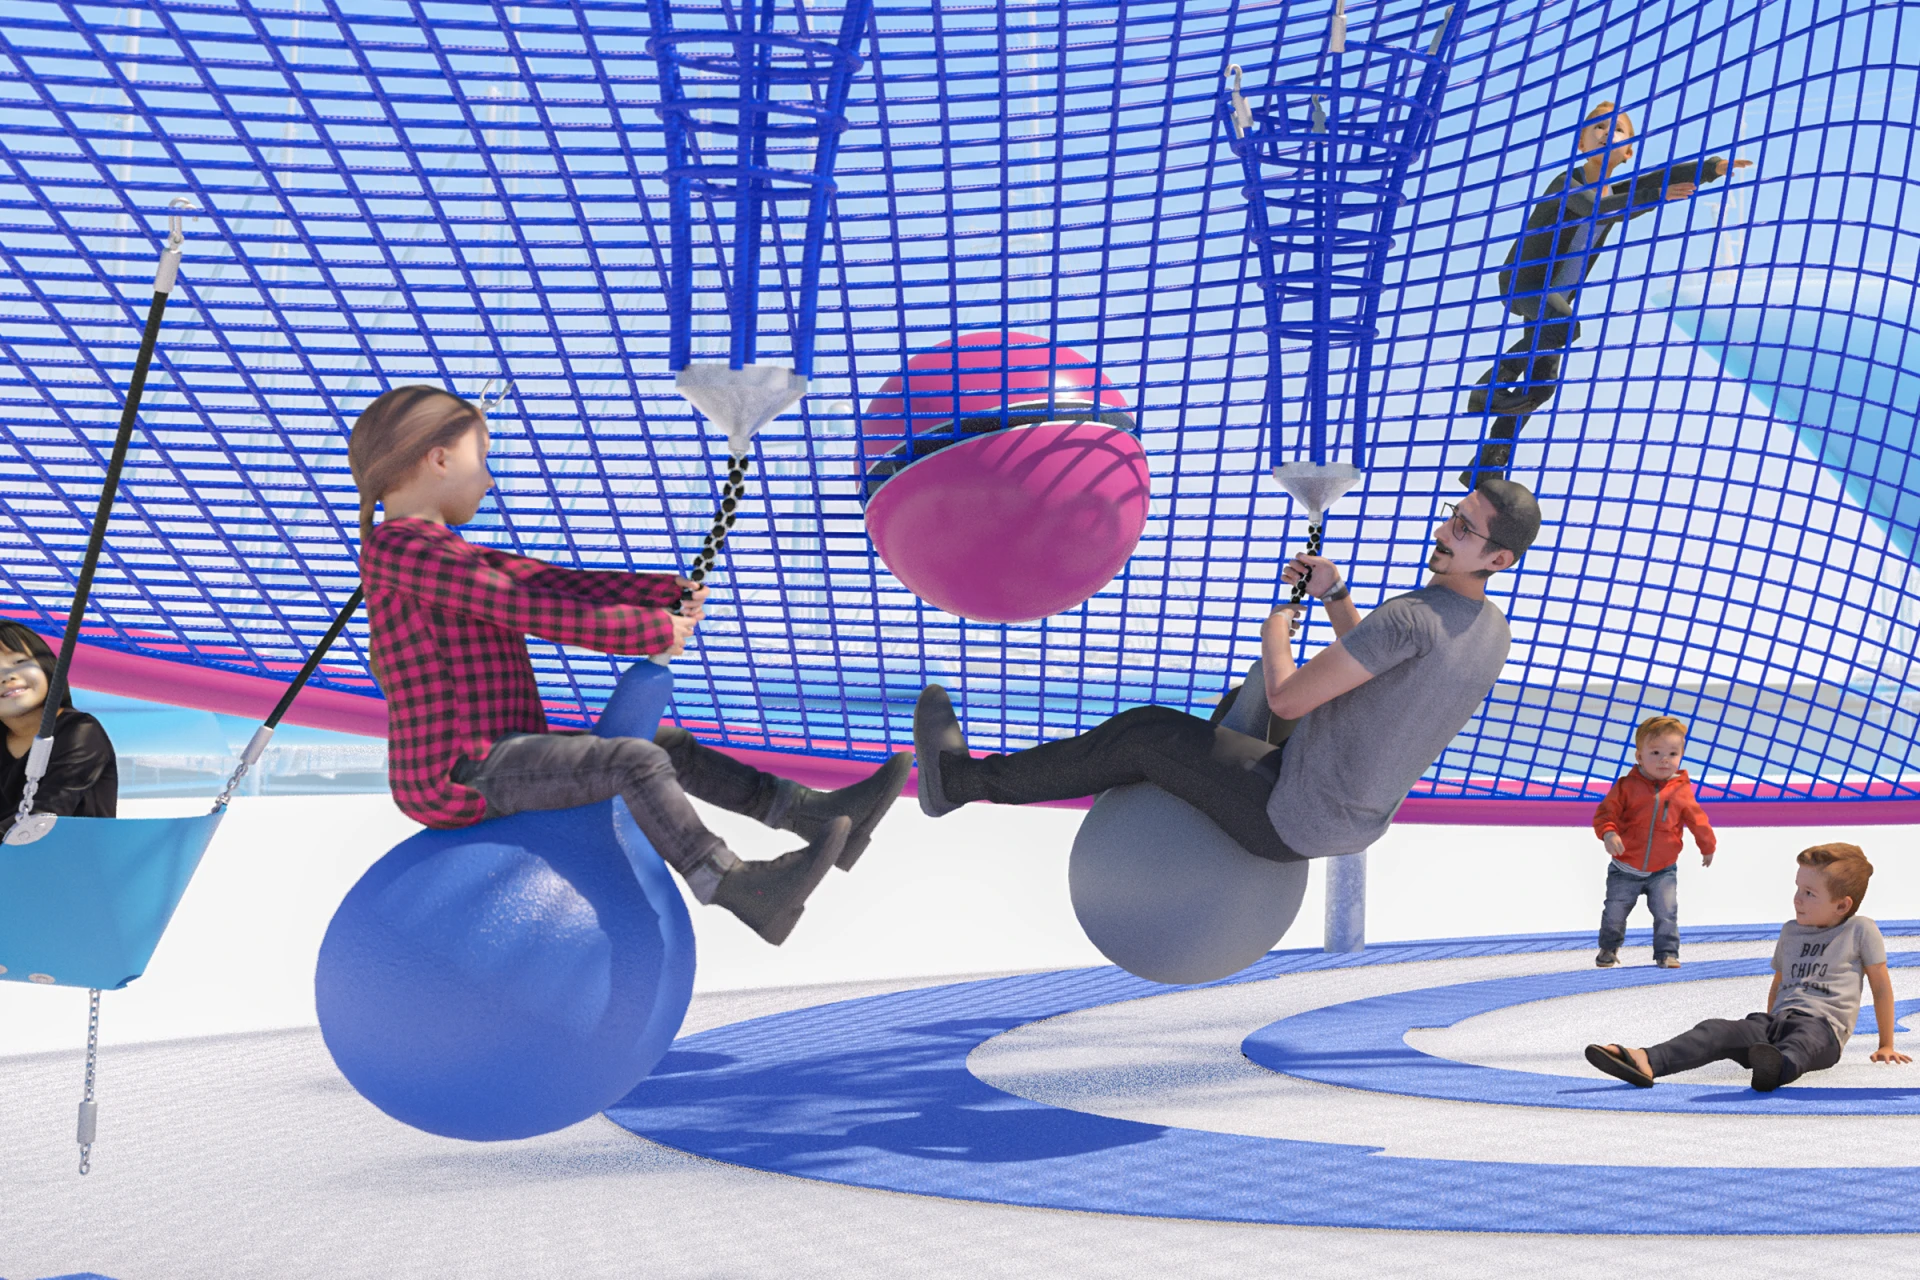 Concept design of children swinging on a rope net structure